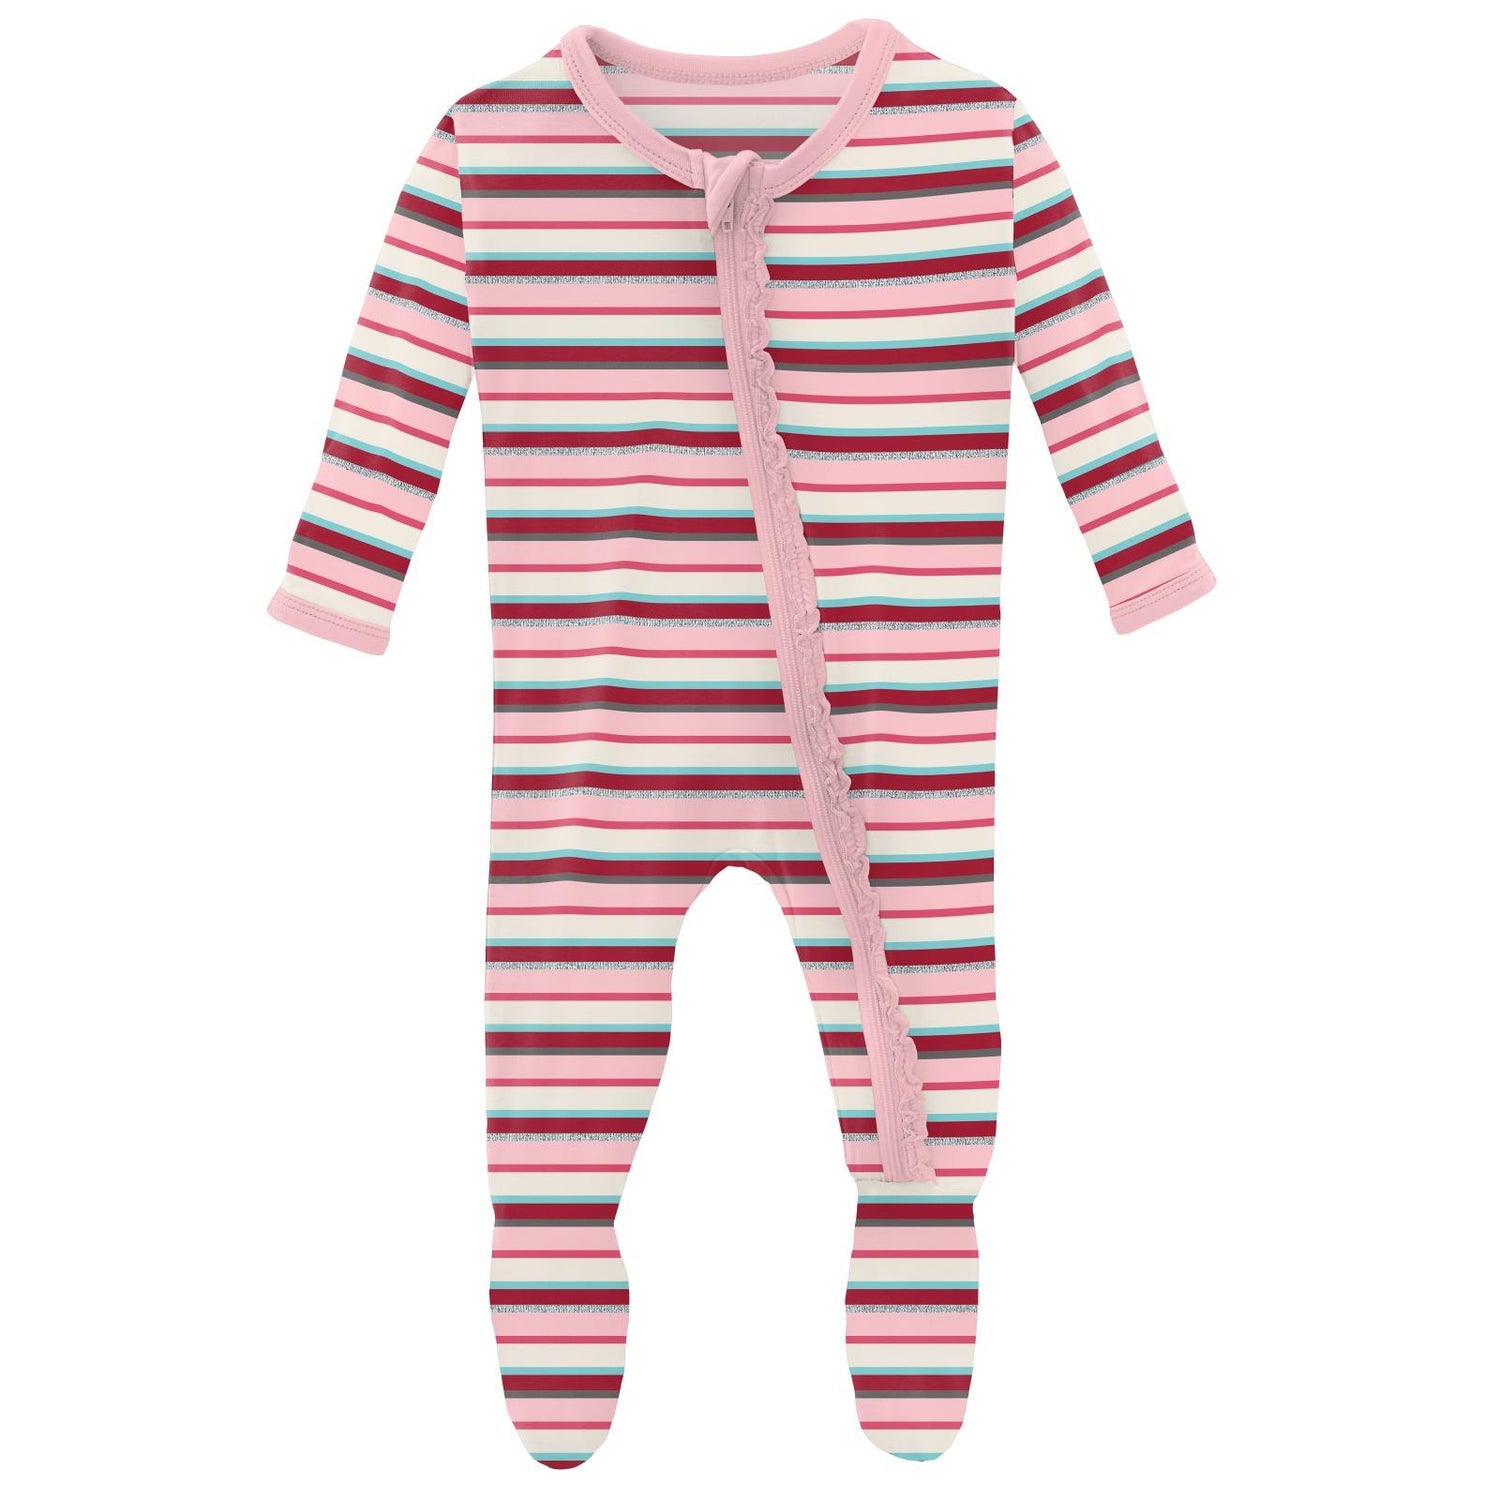 Print Muffin Ruffle Footie with Zipper in Anniversary Bobsled Stripe